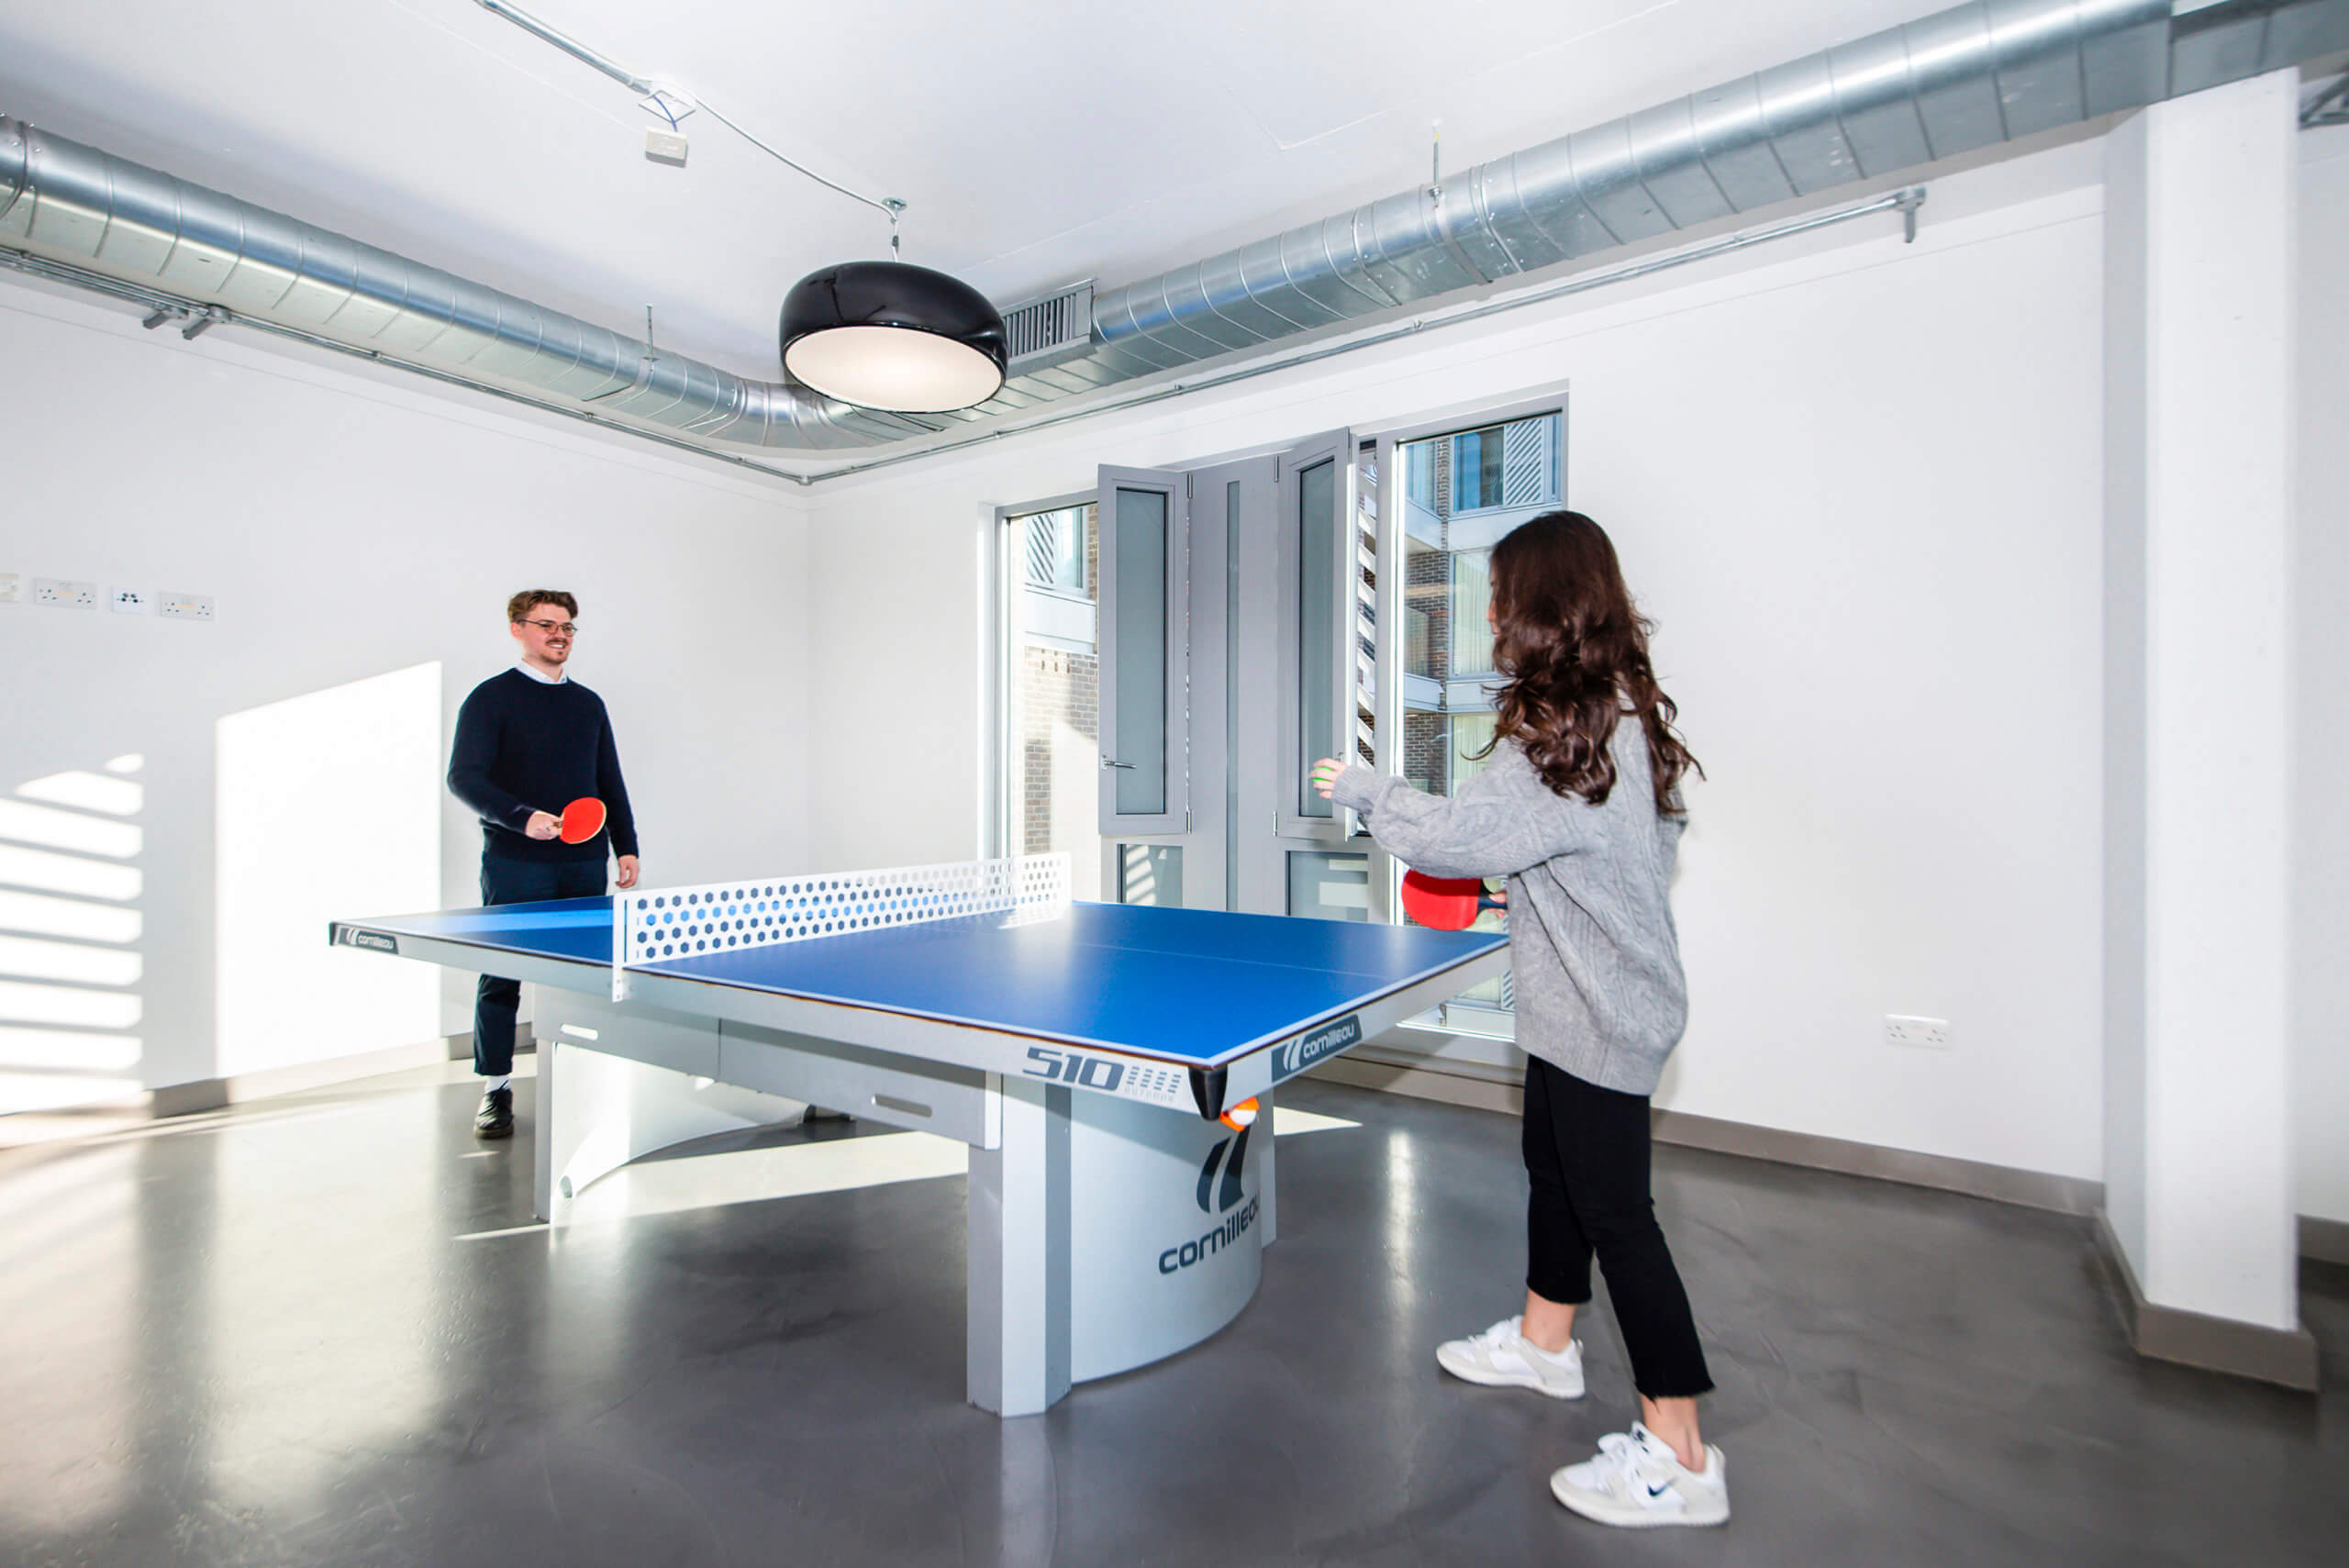 Two people playing at the ping pong table in a white rec room